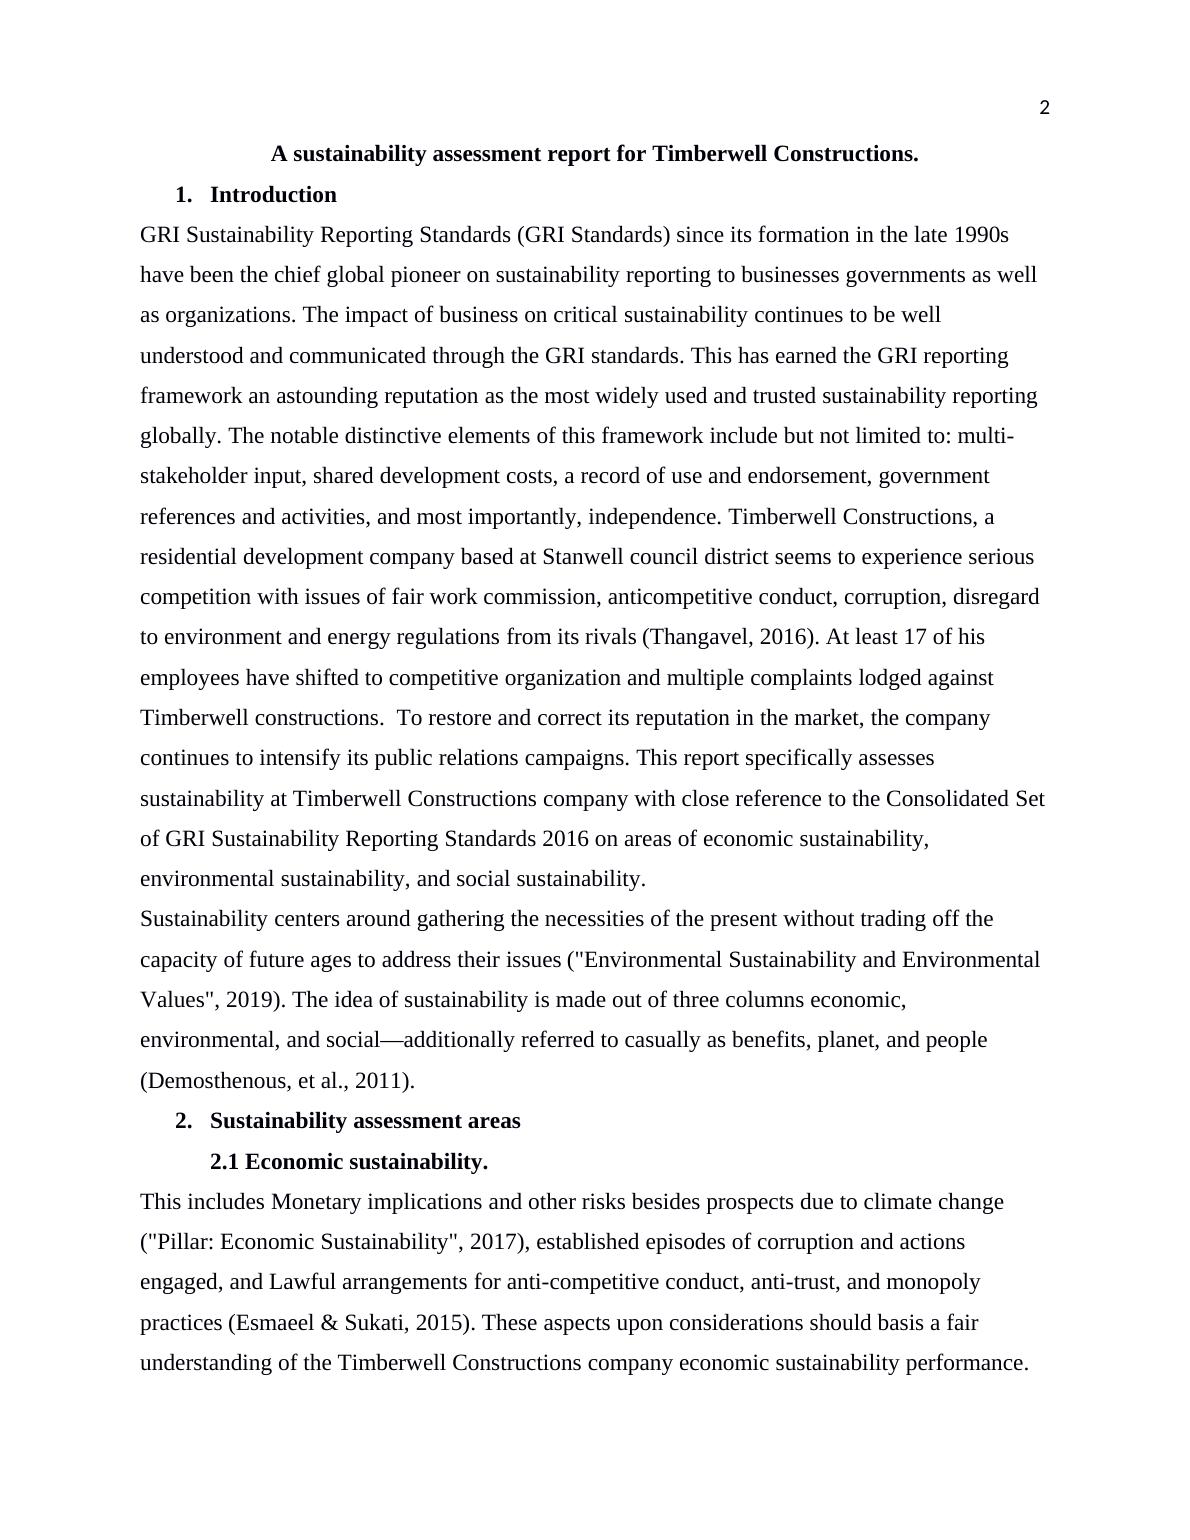 Sustainability Assessment Report for Timberwell Constructions_2